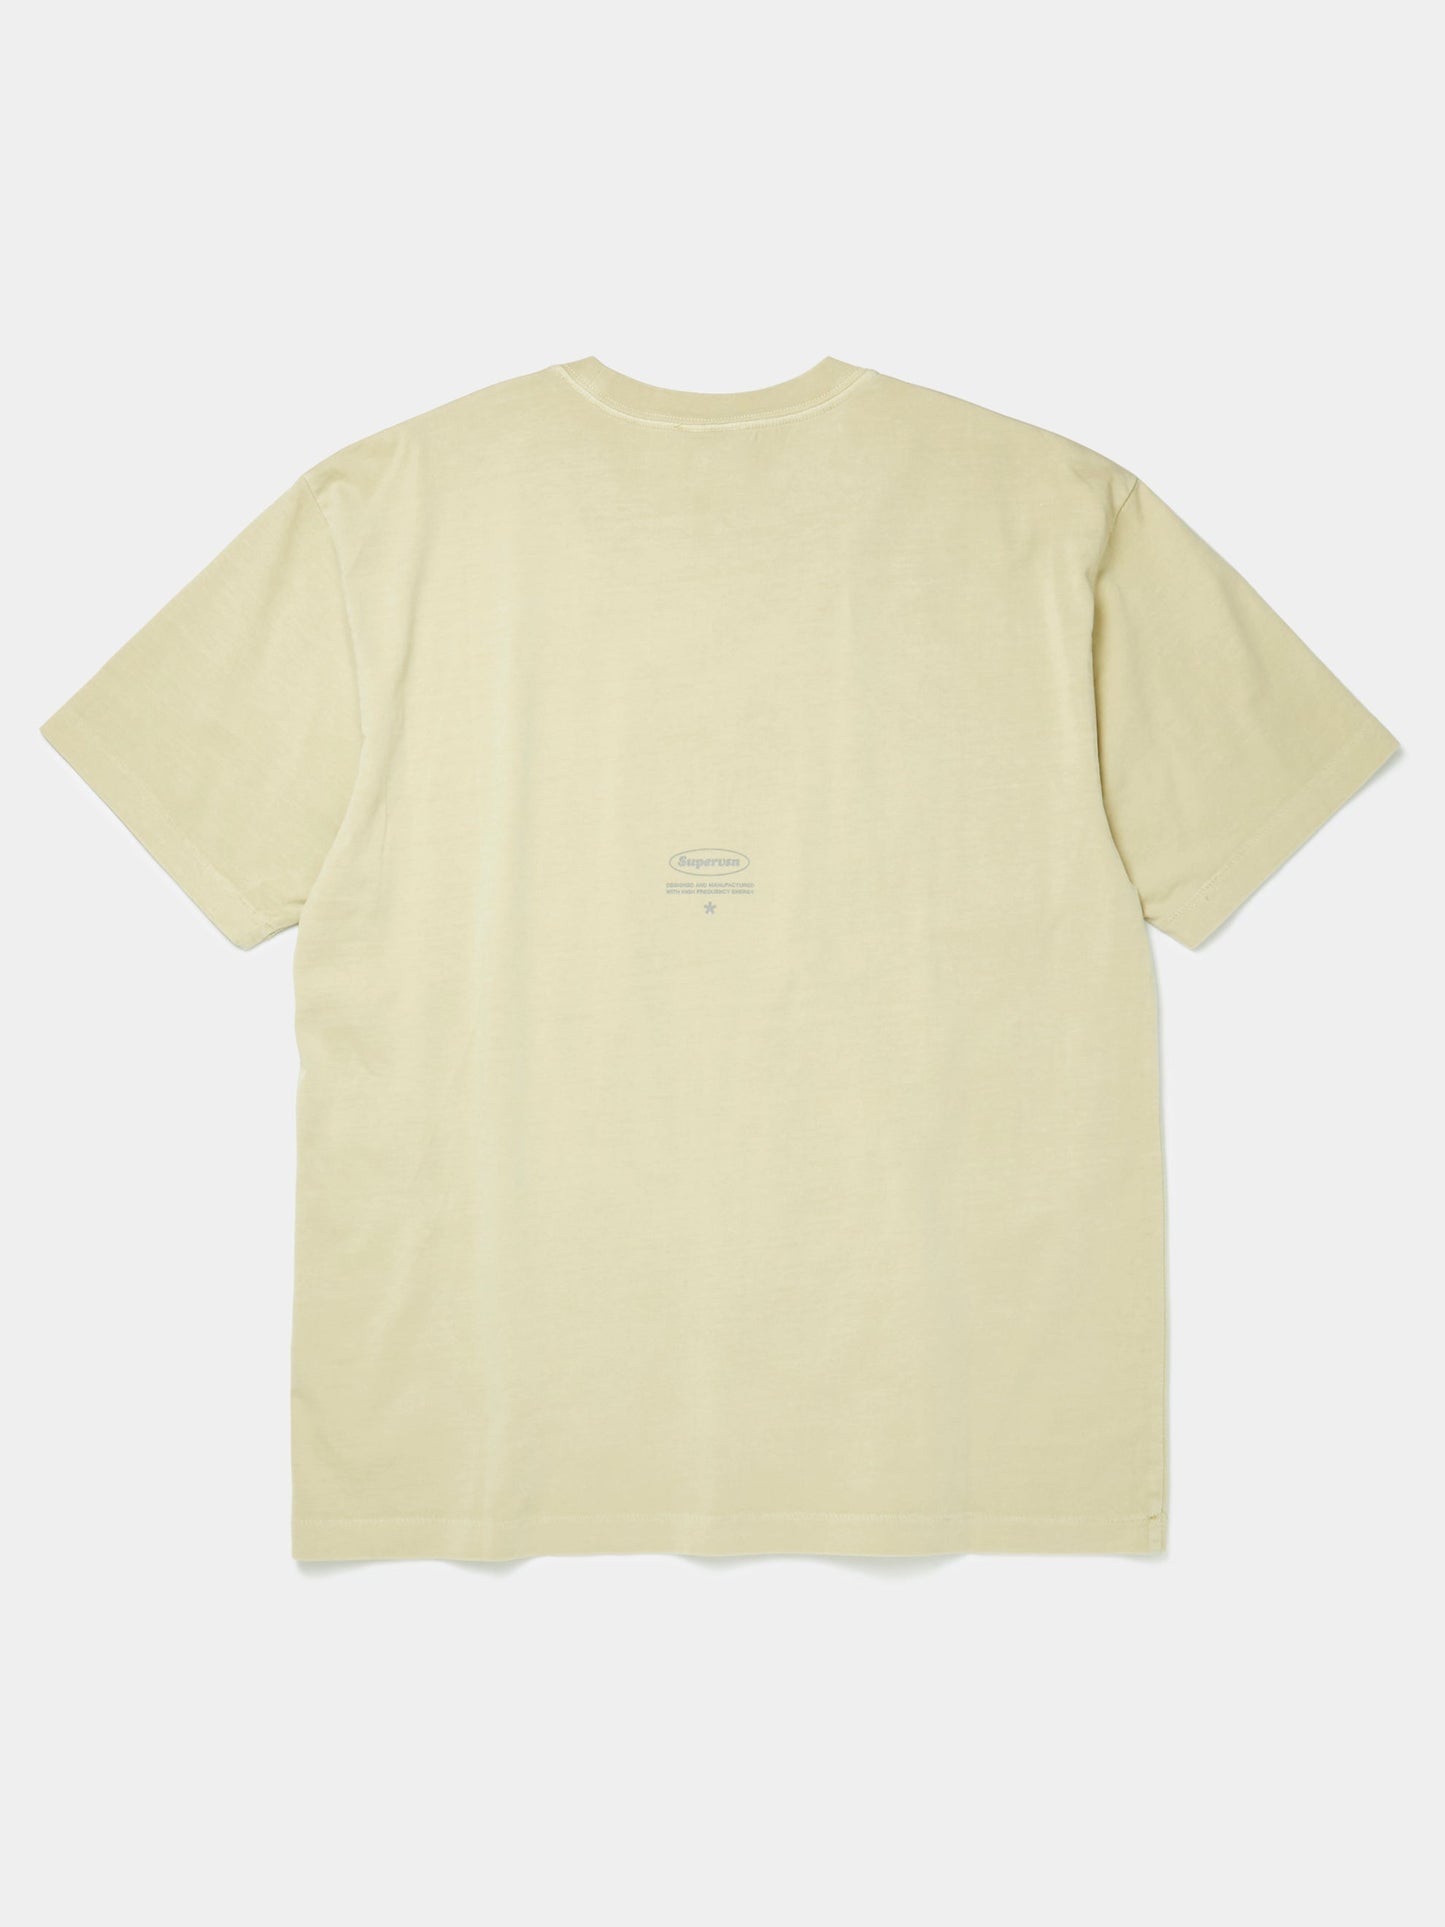 Inside Out Tee (Pale Olive)